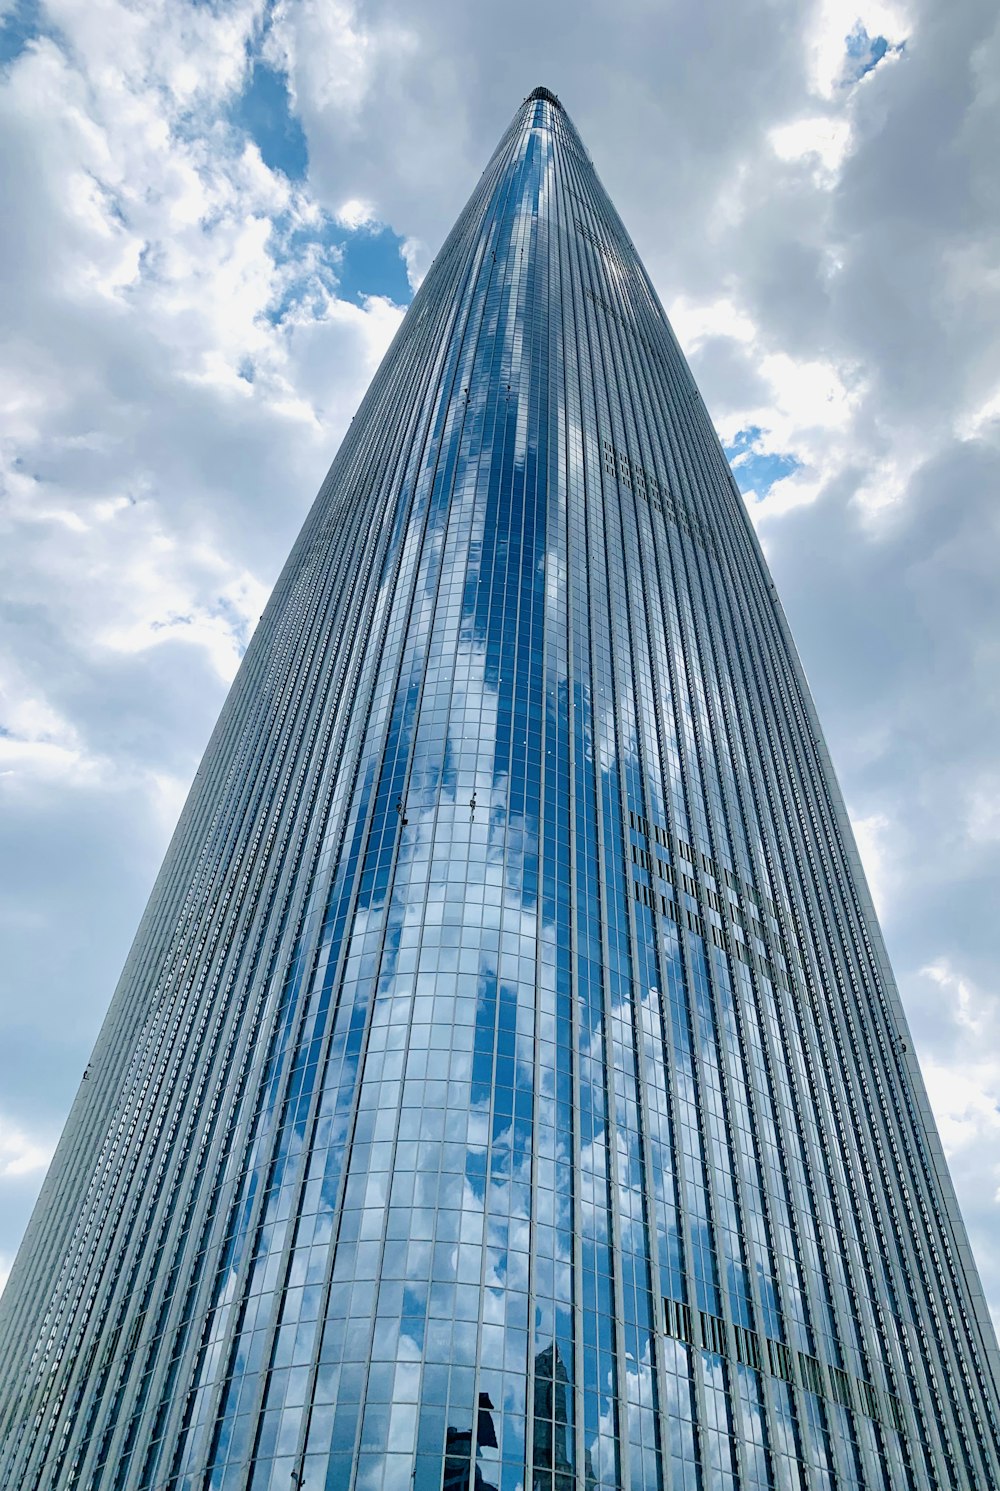 blue and white glass walled high rise building under white clouds and blue sky during daytime